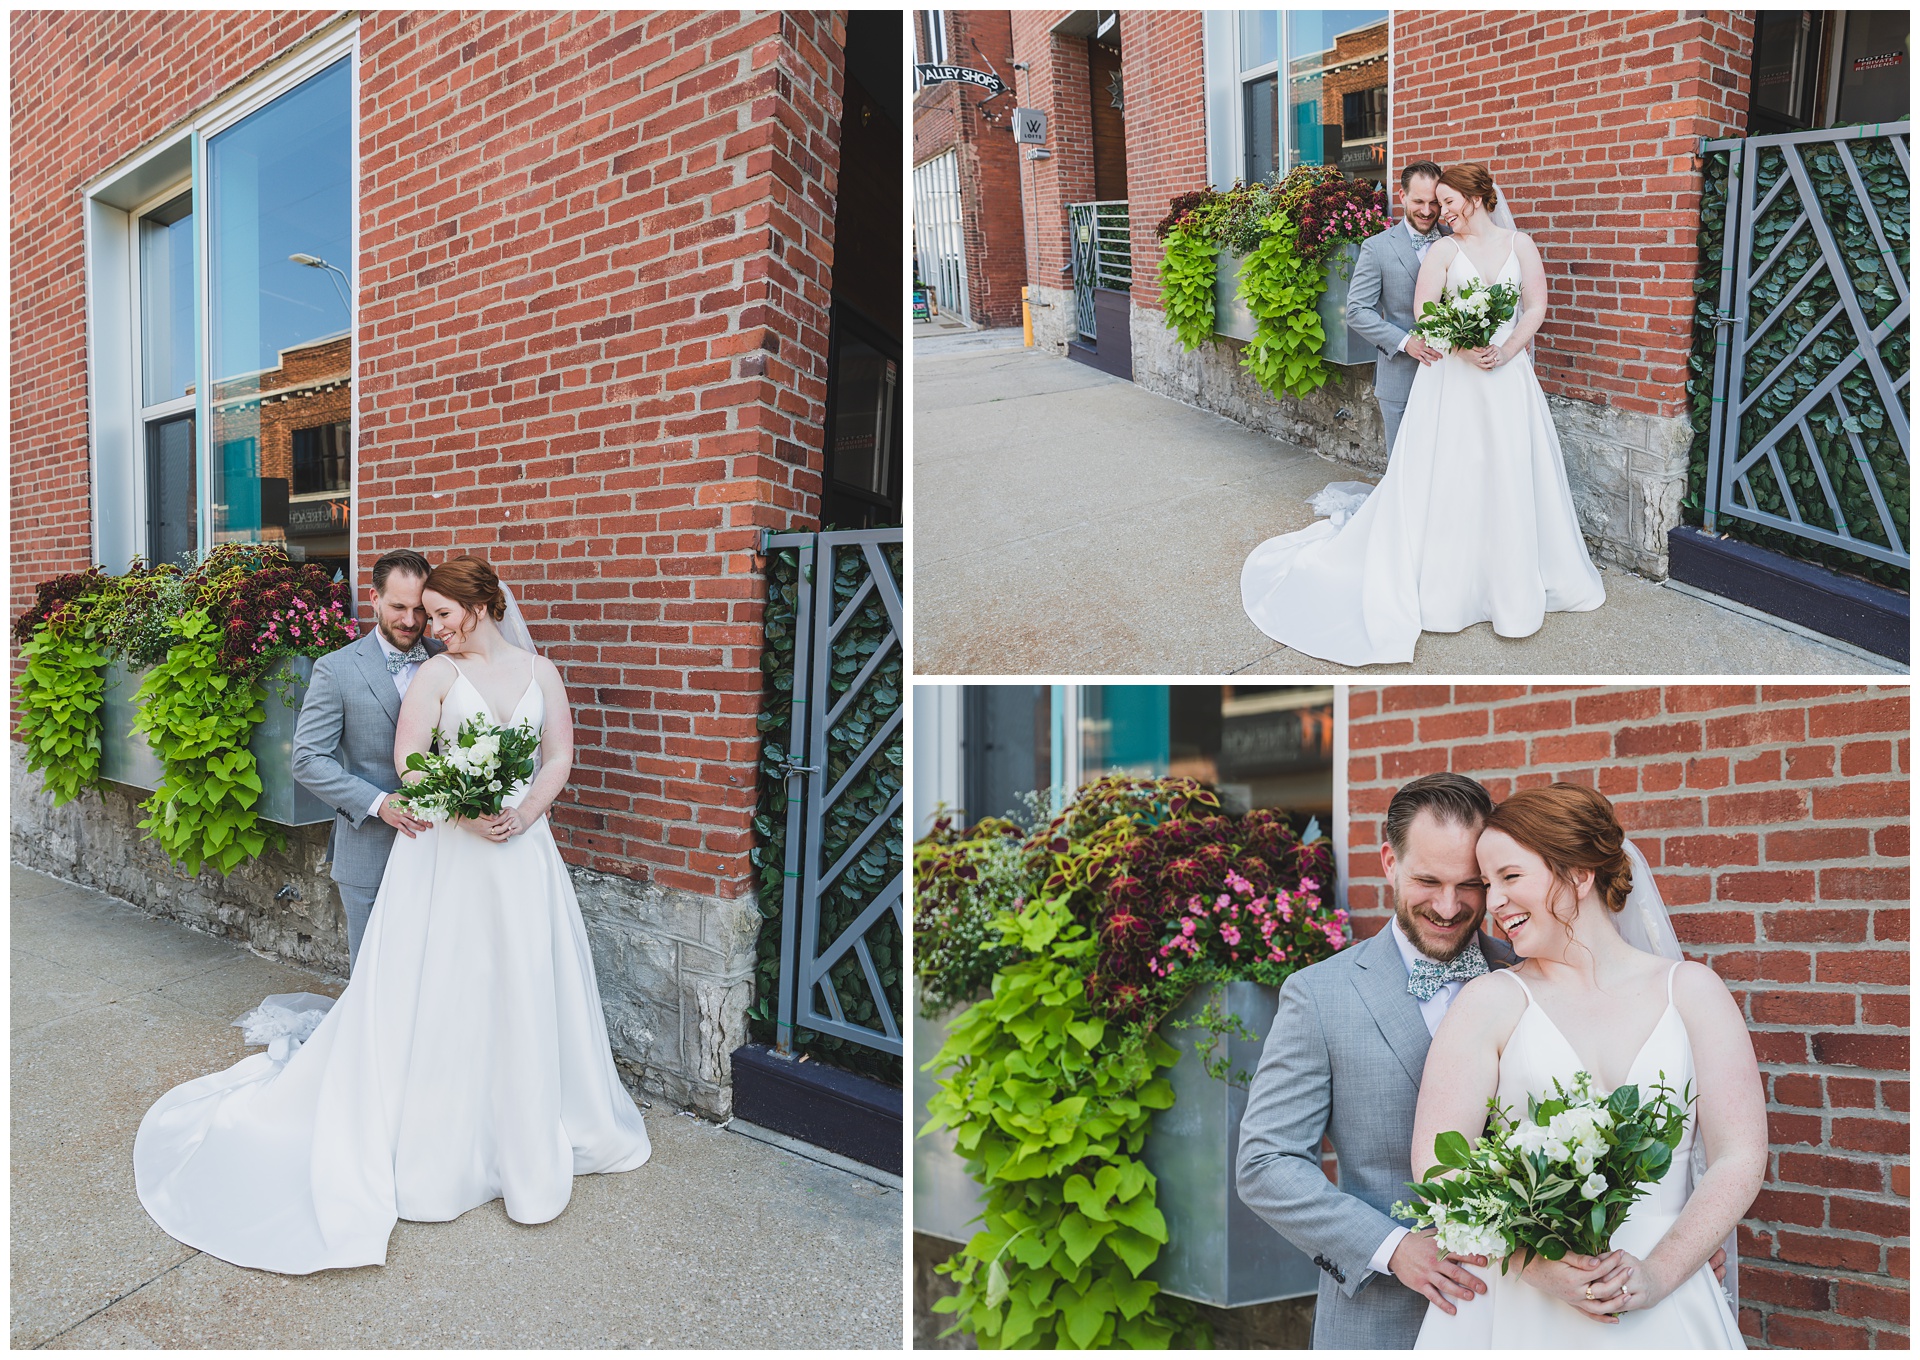 Wedding photography at The Bride and The Bauer by Kansas City wedding photographers Wisdom-Watson Weddings.